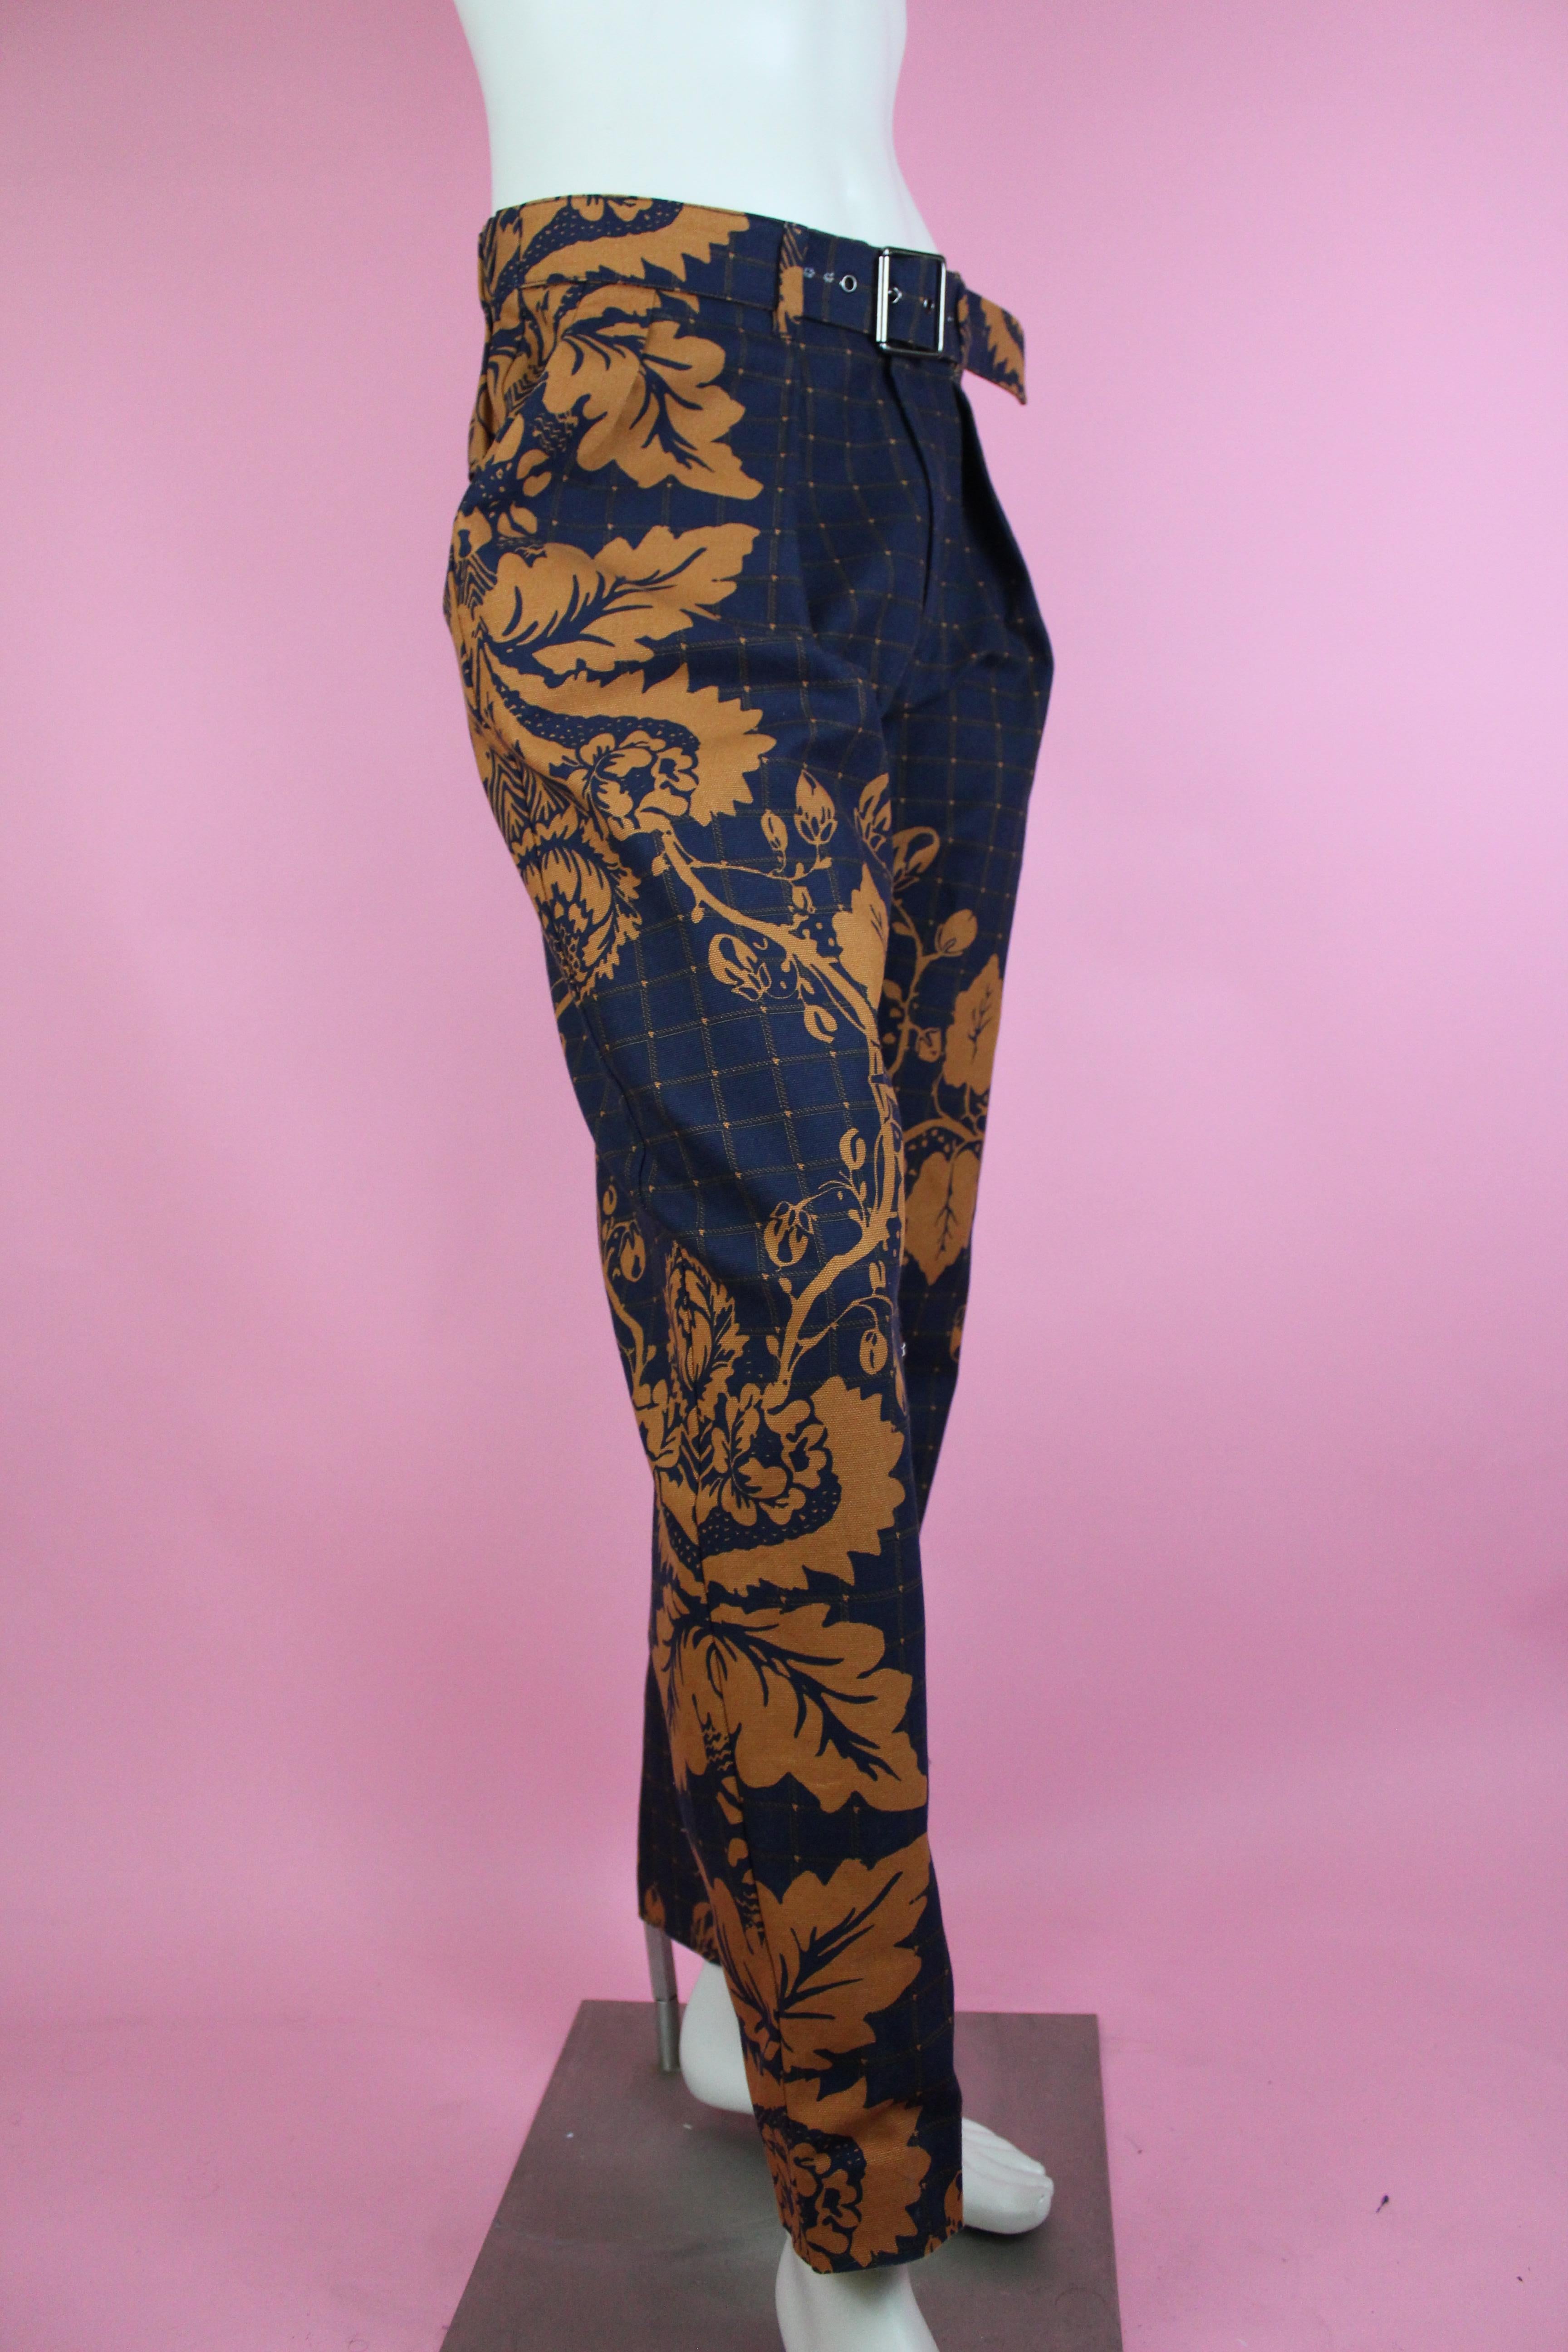 -Phillip Lim floral pants in cotton
-Made of 100% cotton, from Spring Summer 2007
-Have a belt sewn on to waist to tighten and a hook with zipper. 

Approximate Measurements 
-Waist: 32